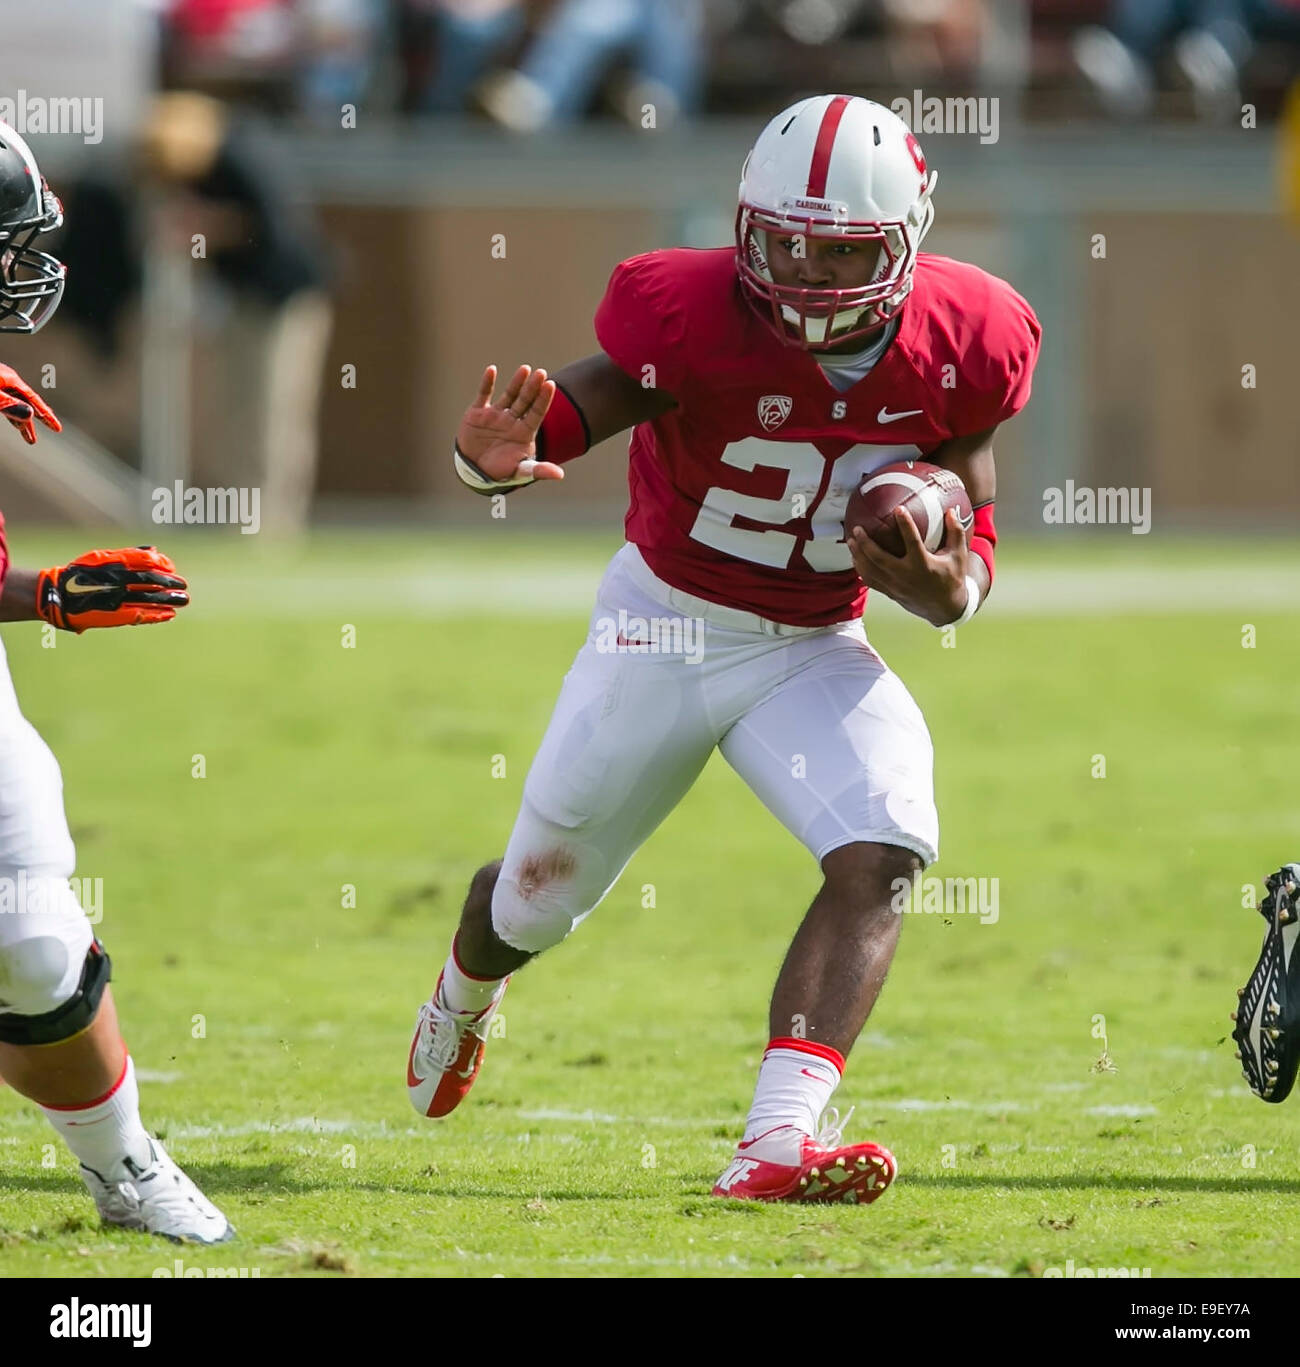 October 25, 2014: Stanford Cardinal running back Barry Sanders (26) in action during the NCAA Football game between the Stanford Cardinal and the Oregon State Beavers at Stanford Stadium in Palo Alto, CA. Stanford defeated Oregon State 38-14. Damon Tarver/Cal Sport Media Stock Photo